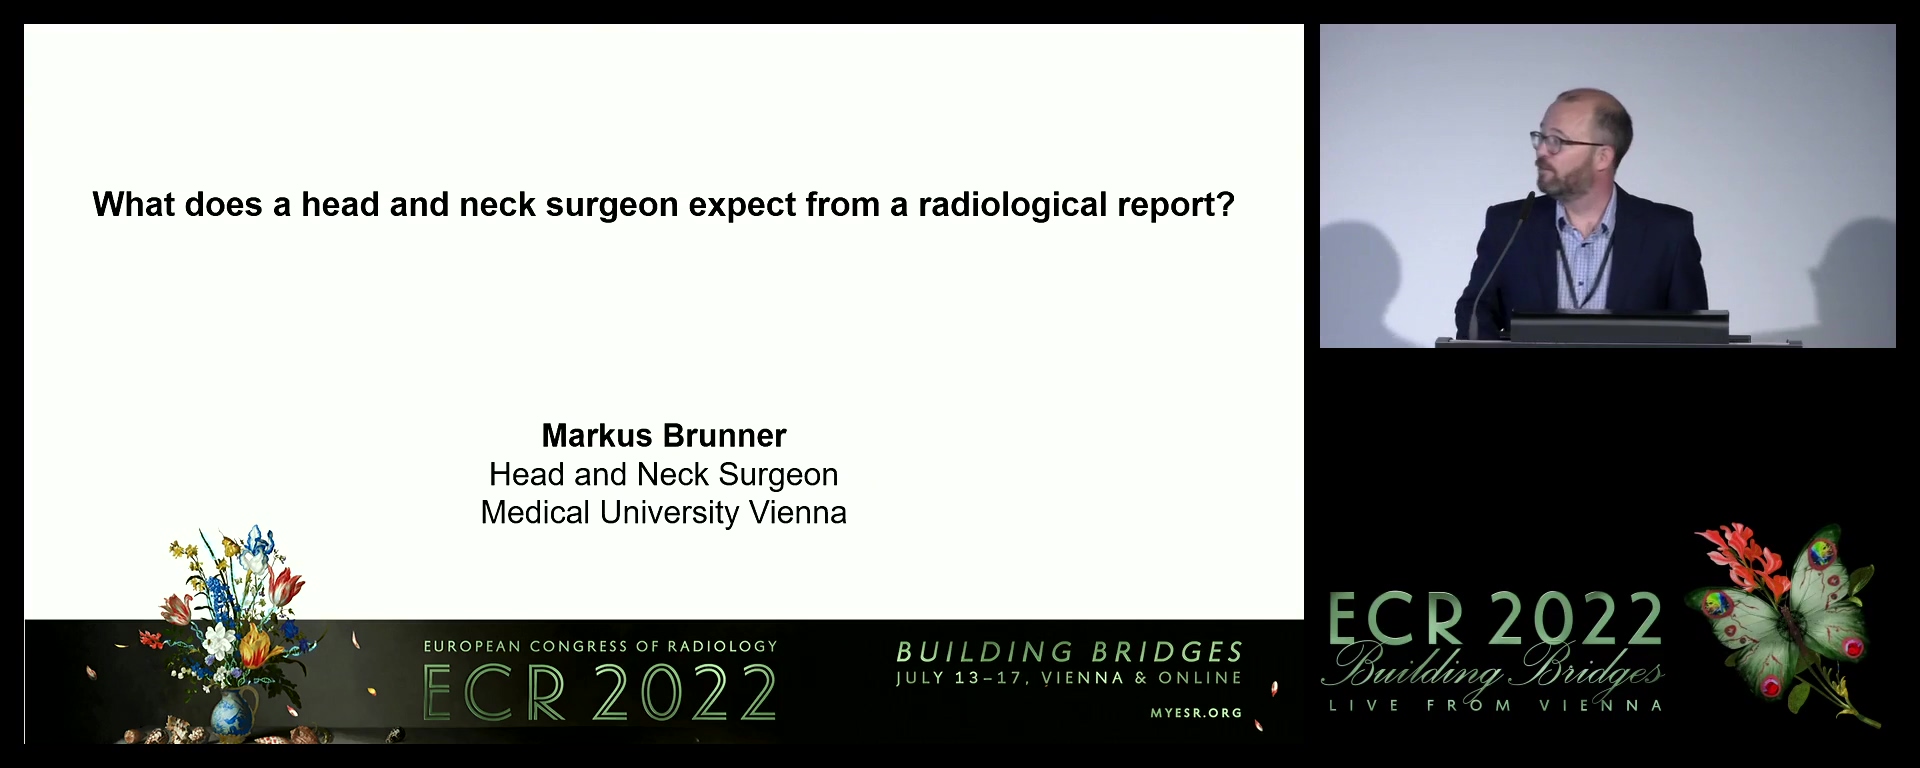 What does a head and neck surgeon expect from a radiological report